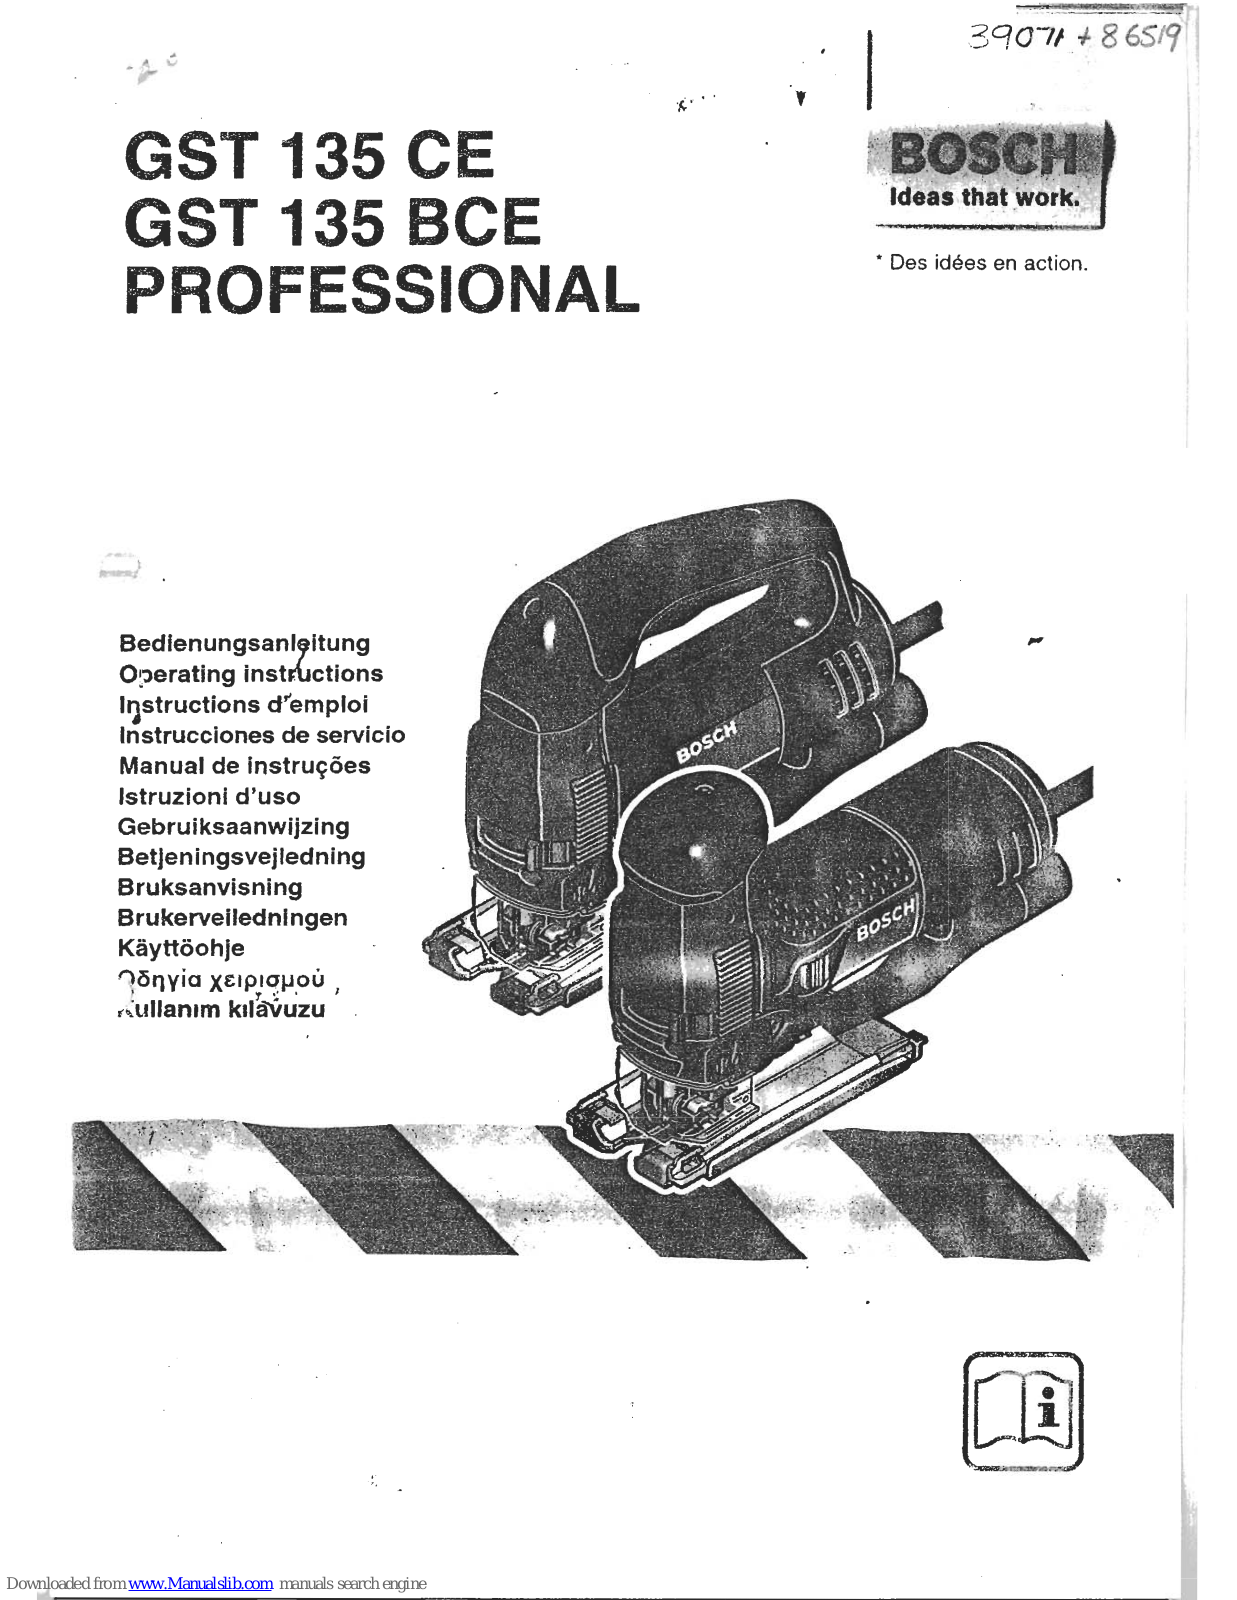 Bosch GST 132 BCE Professional, GST 132 CE Professional Operating Instructions Manual